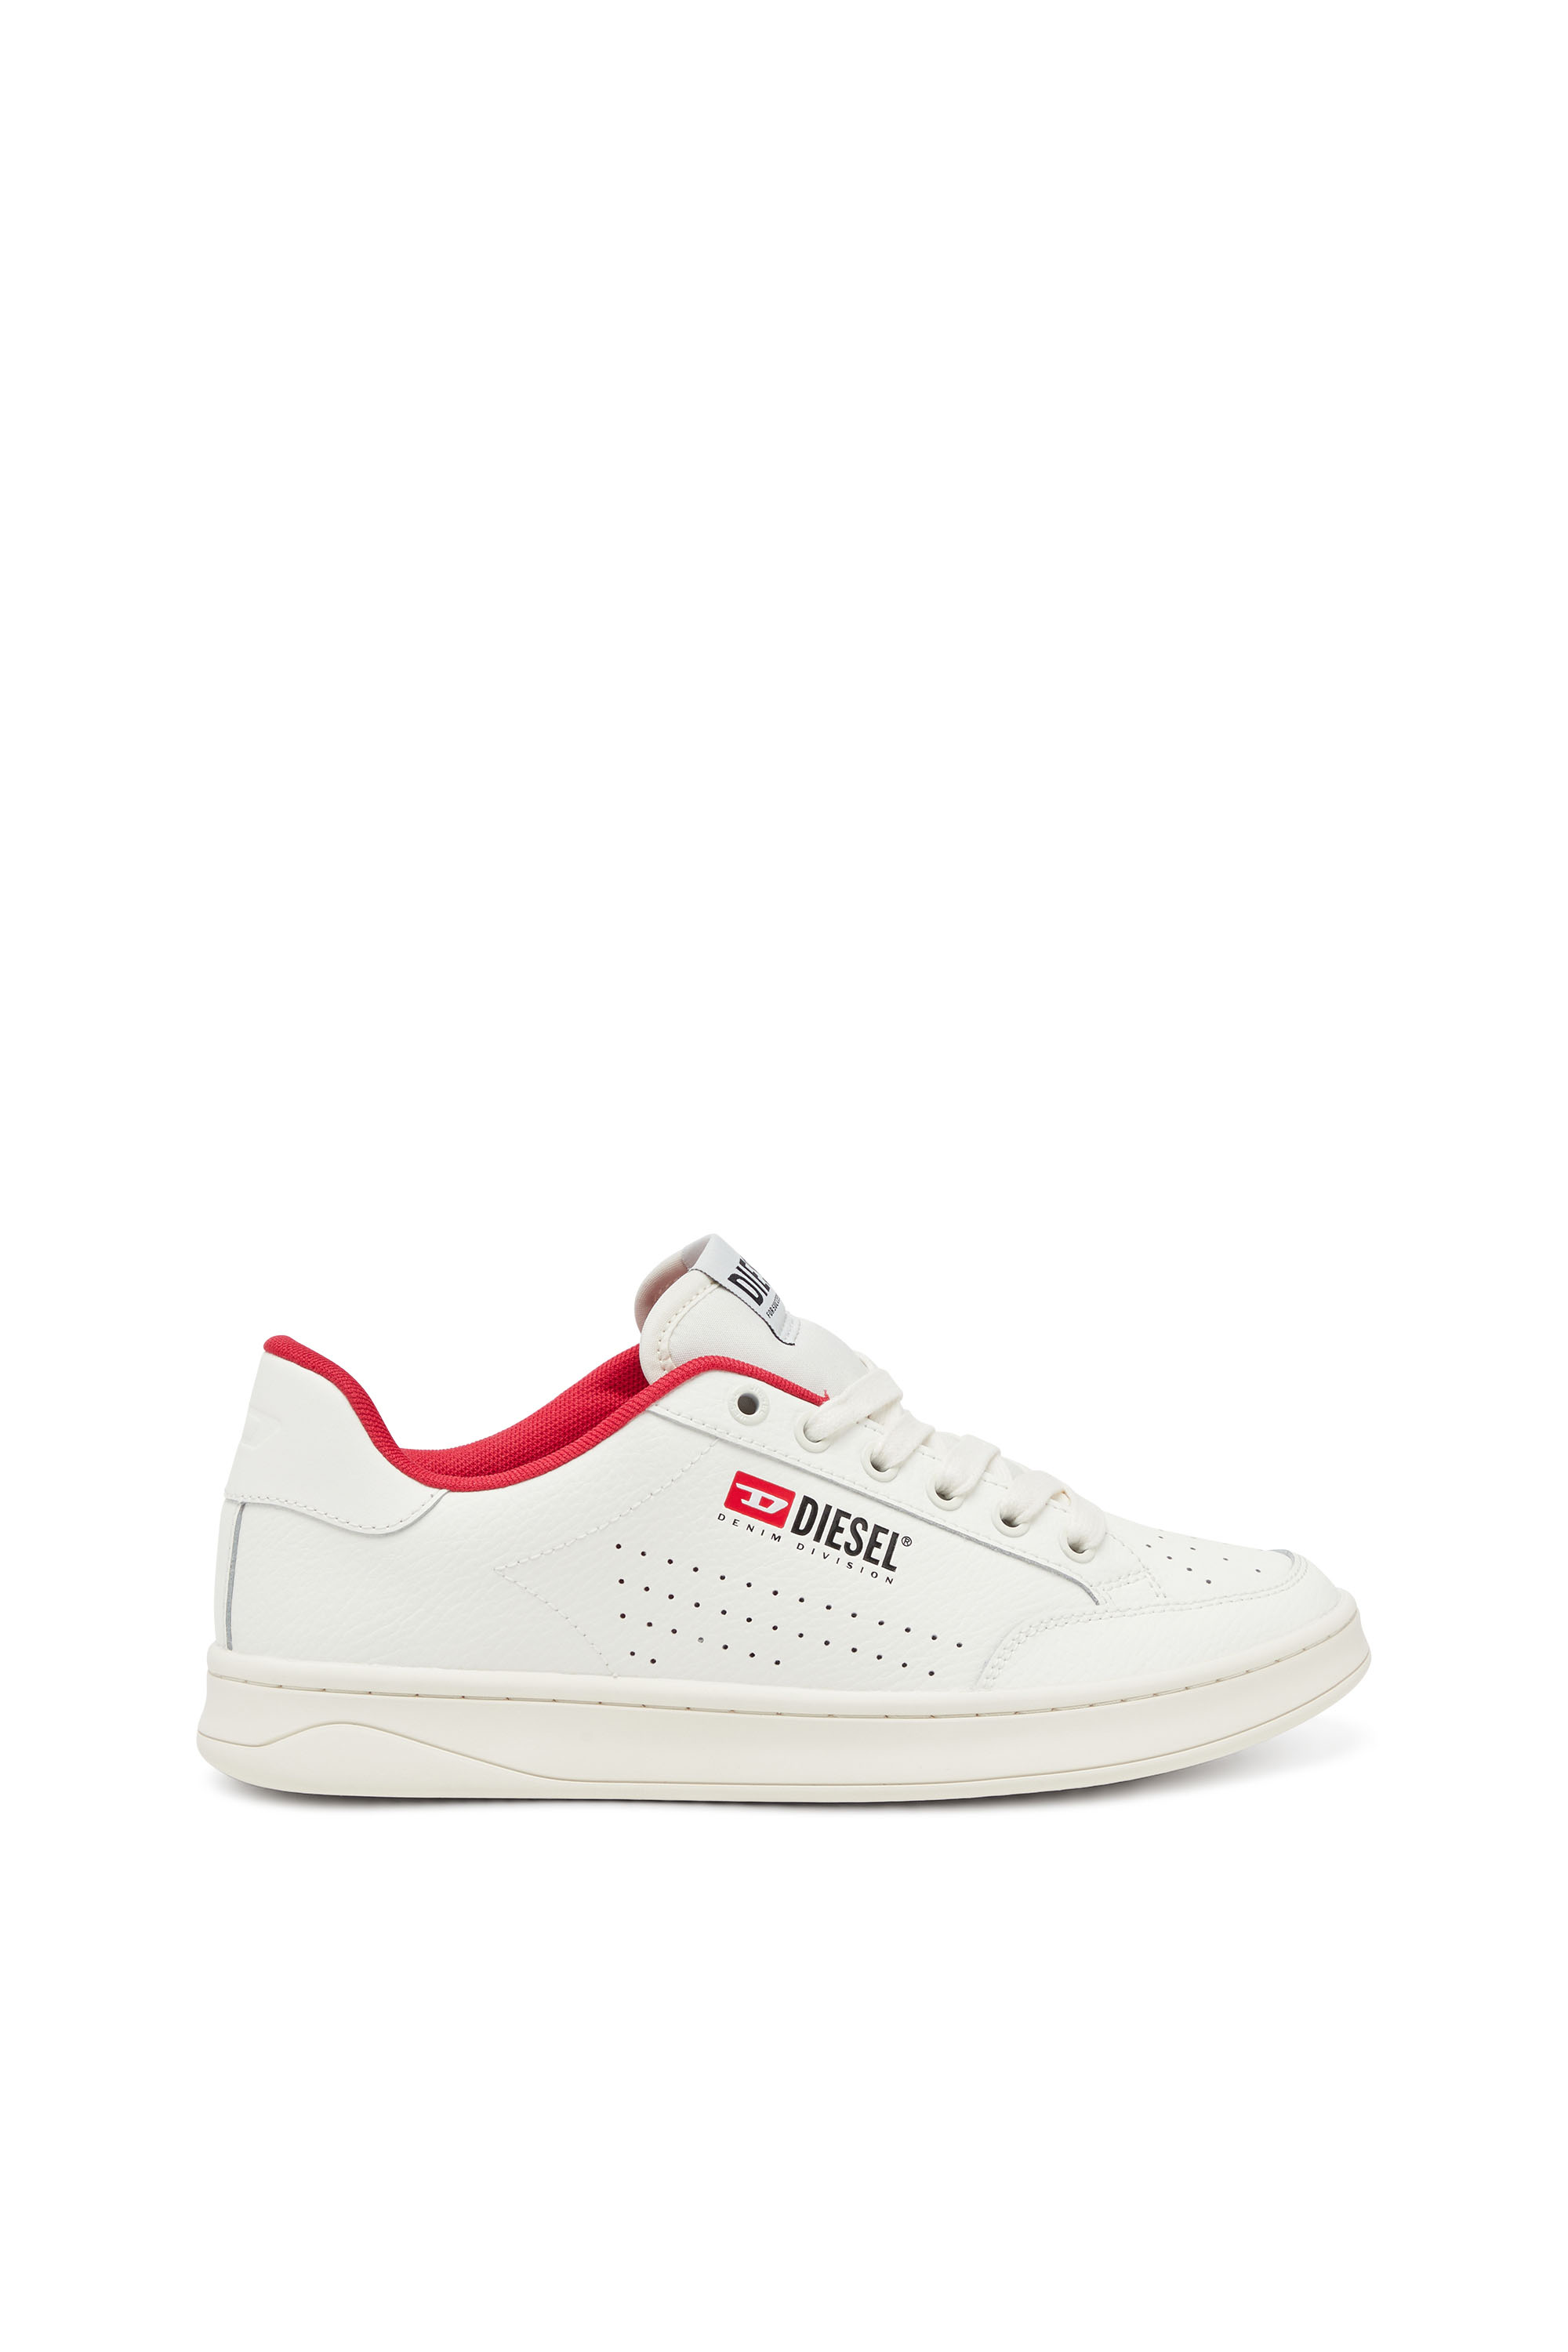 Diesel - S-Athene-Retro sneakers in perforated leather - Sneakers - Man - Multicolor